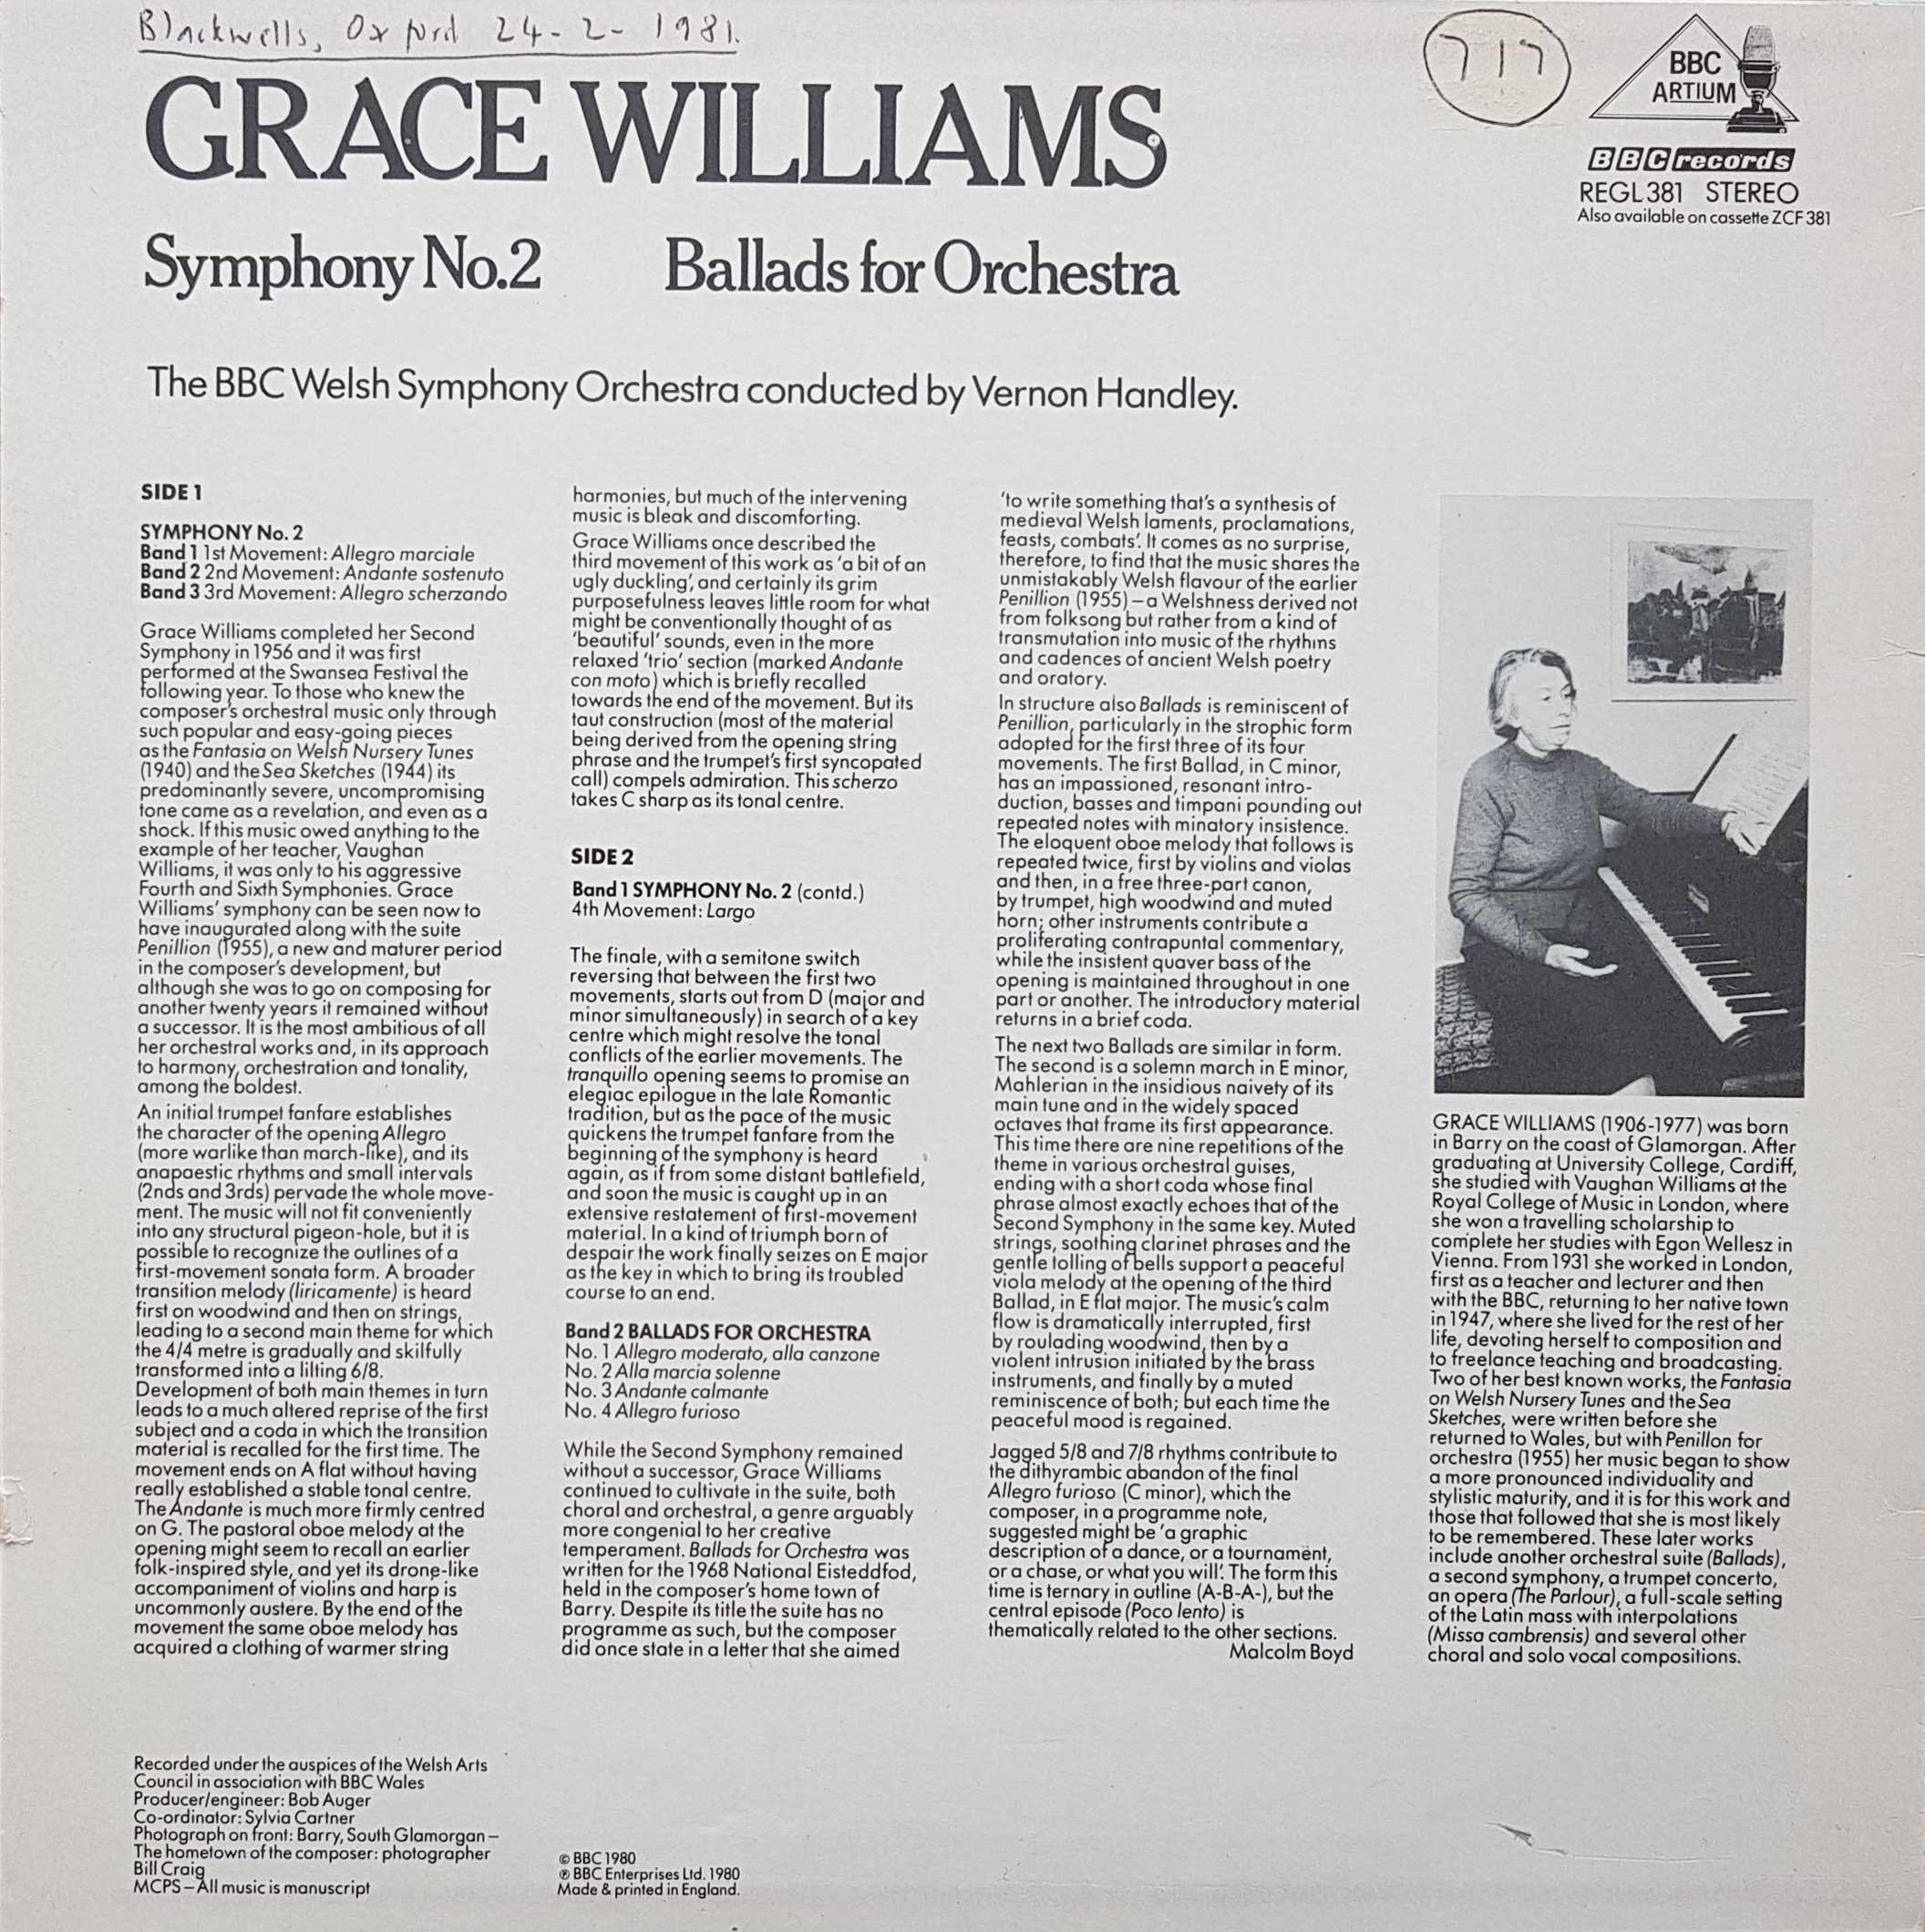 Picture of REGL 381 Grace Williams: Symphony No.2 by artist Grace Williams from the BBC records and Tapes library